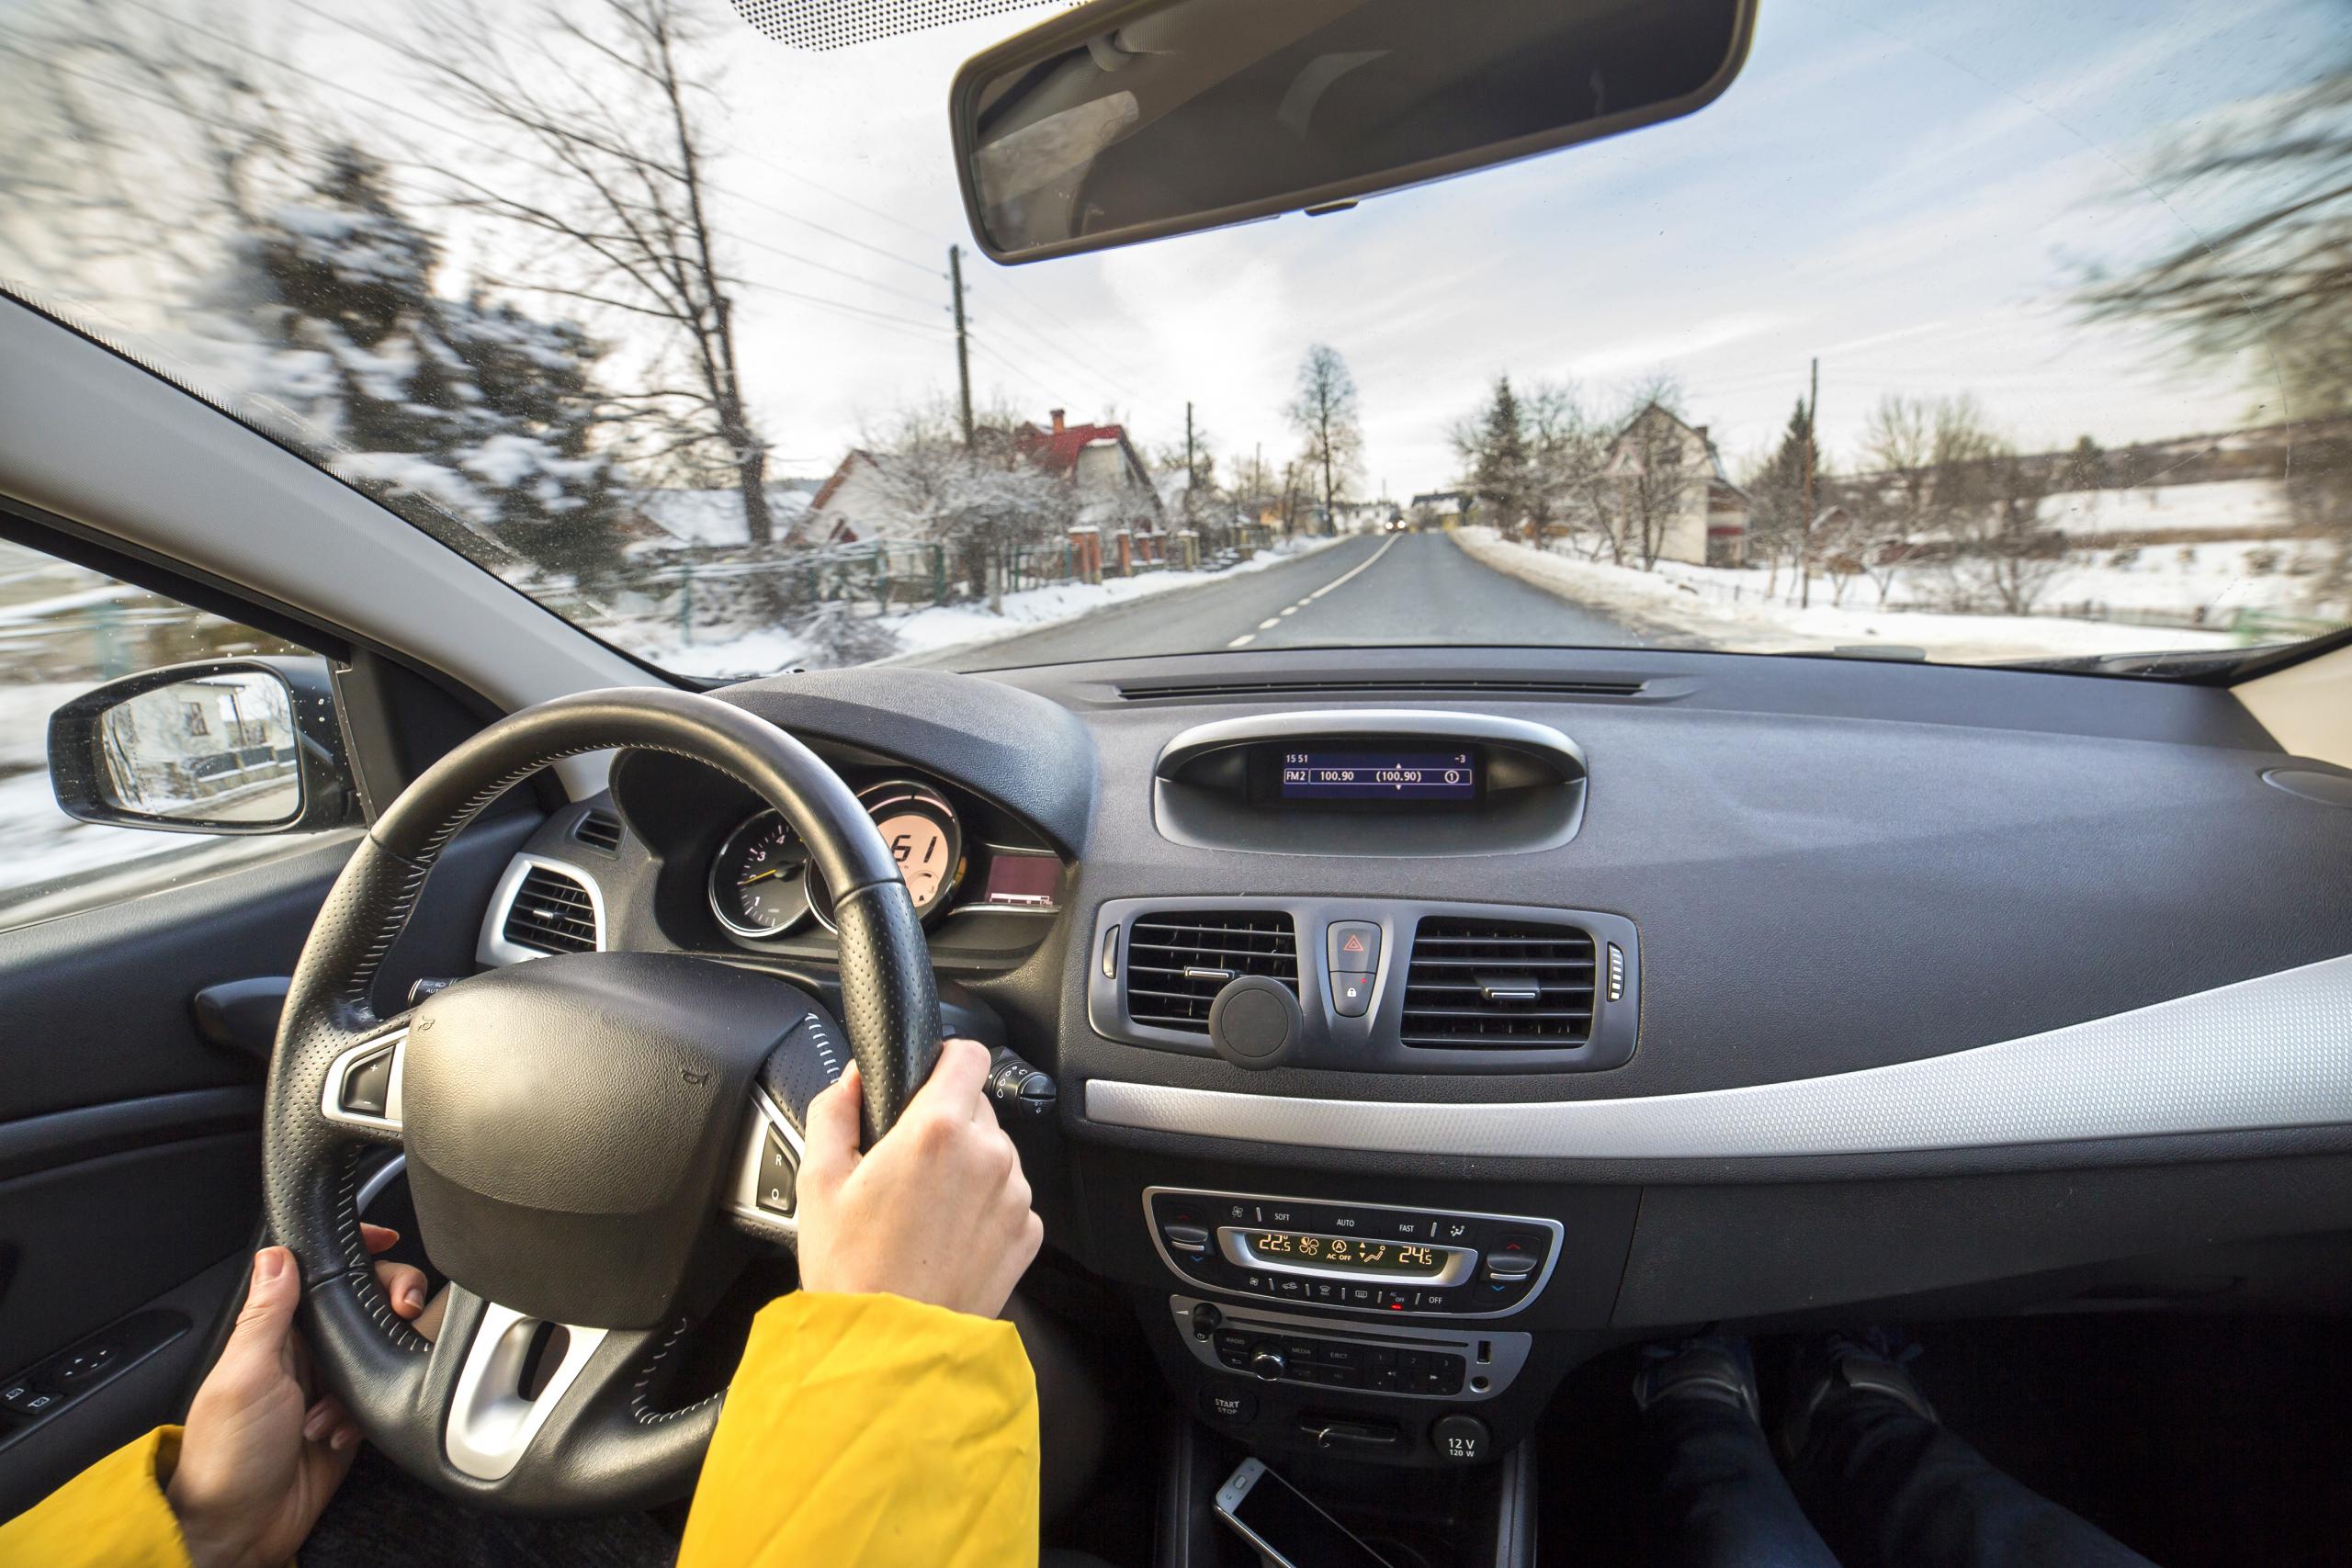 Top 5 Tips for Driving Safe in Winter